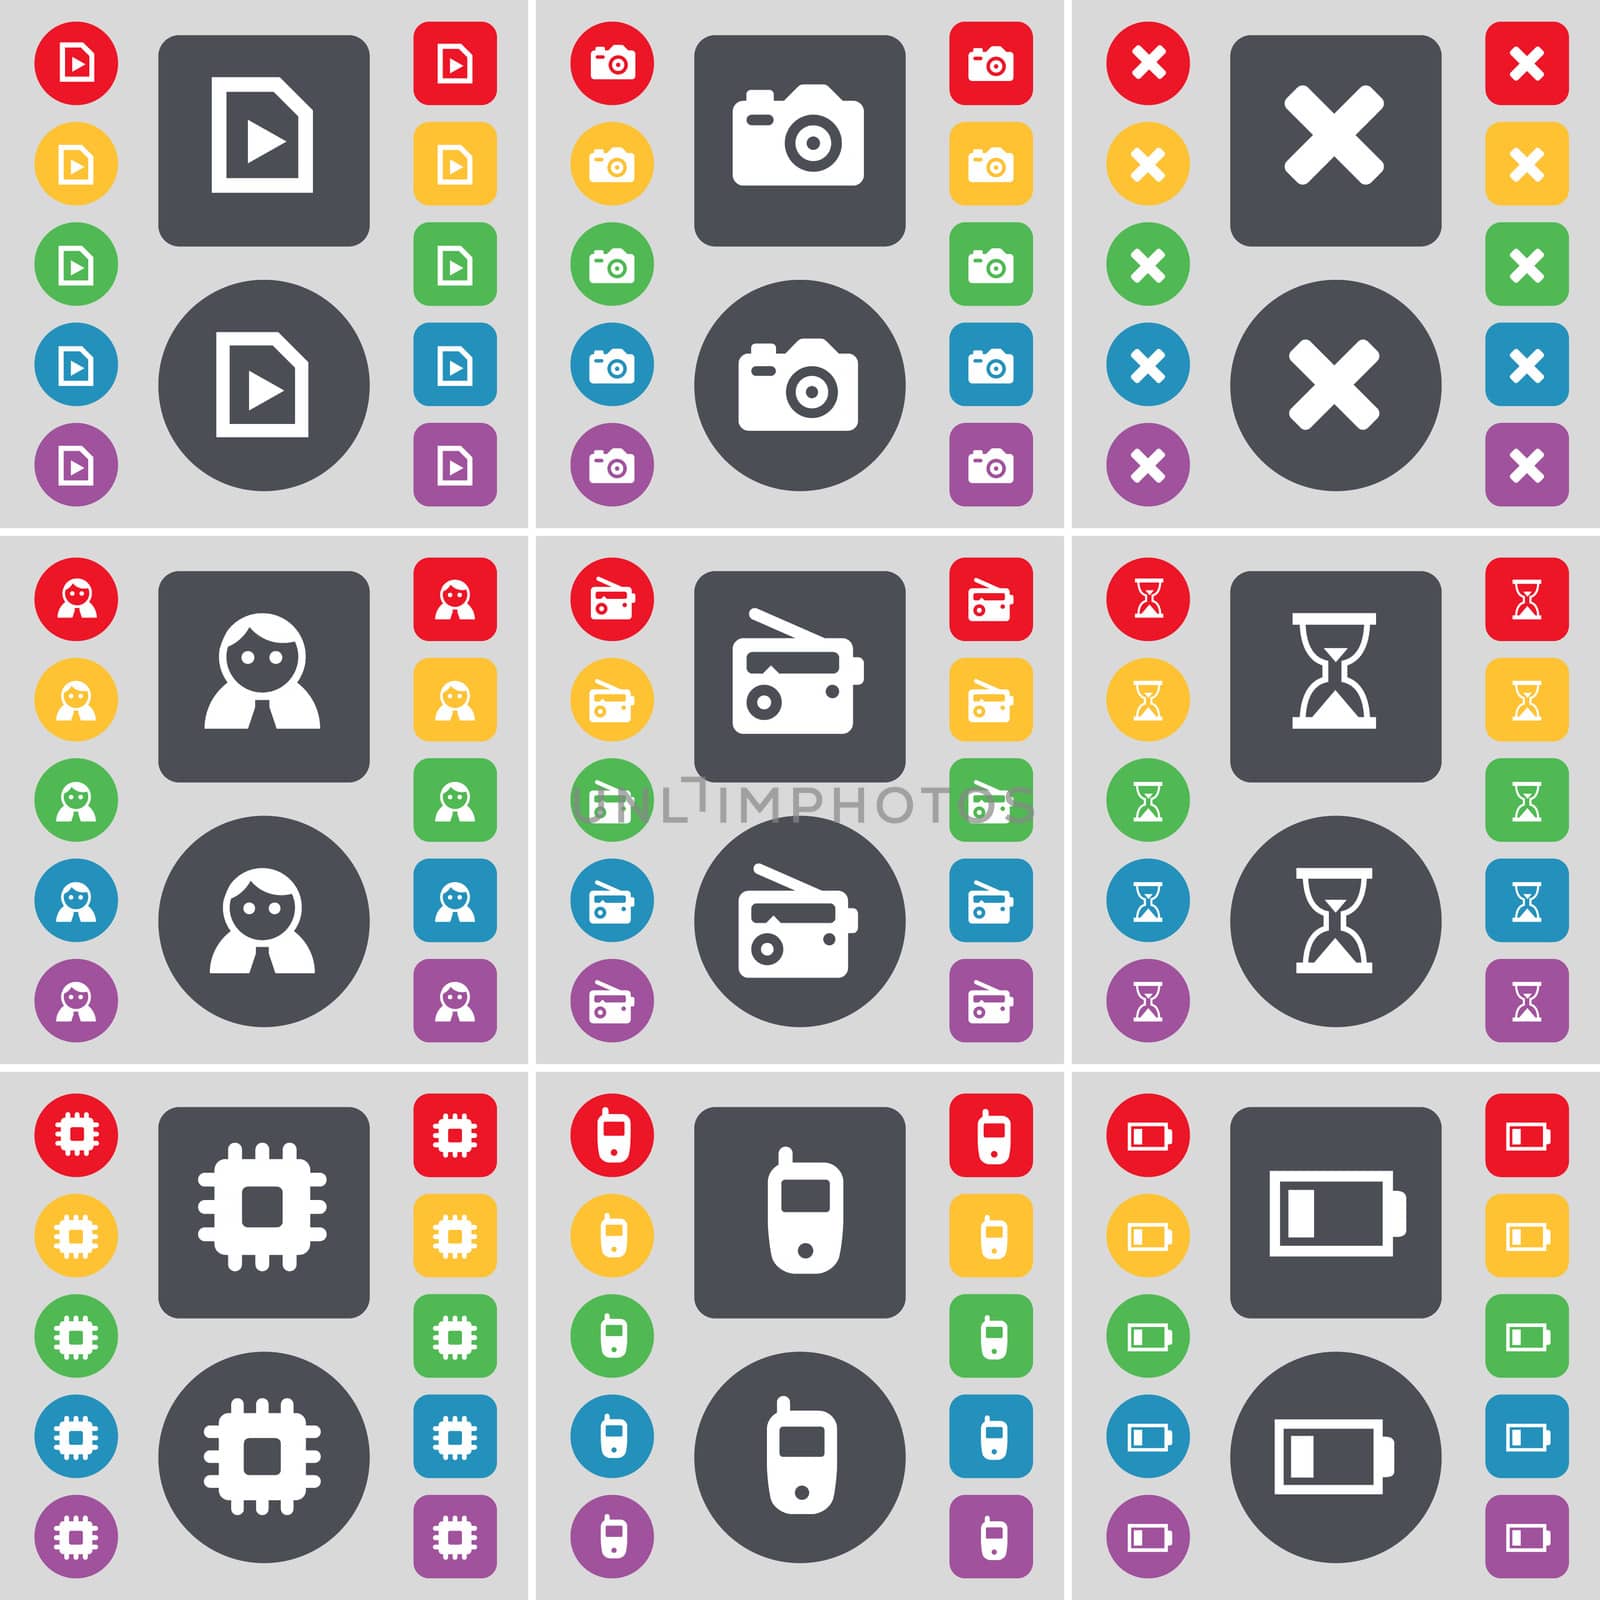 Media file, Camera, Stop, Avatar, Radio, Hourglass, Processor, Mobile phone, Battery icon symbol. A large set of flat, colored buttons for your design. illustration